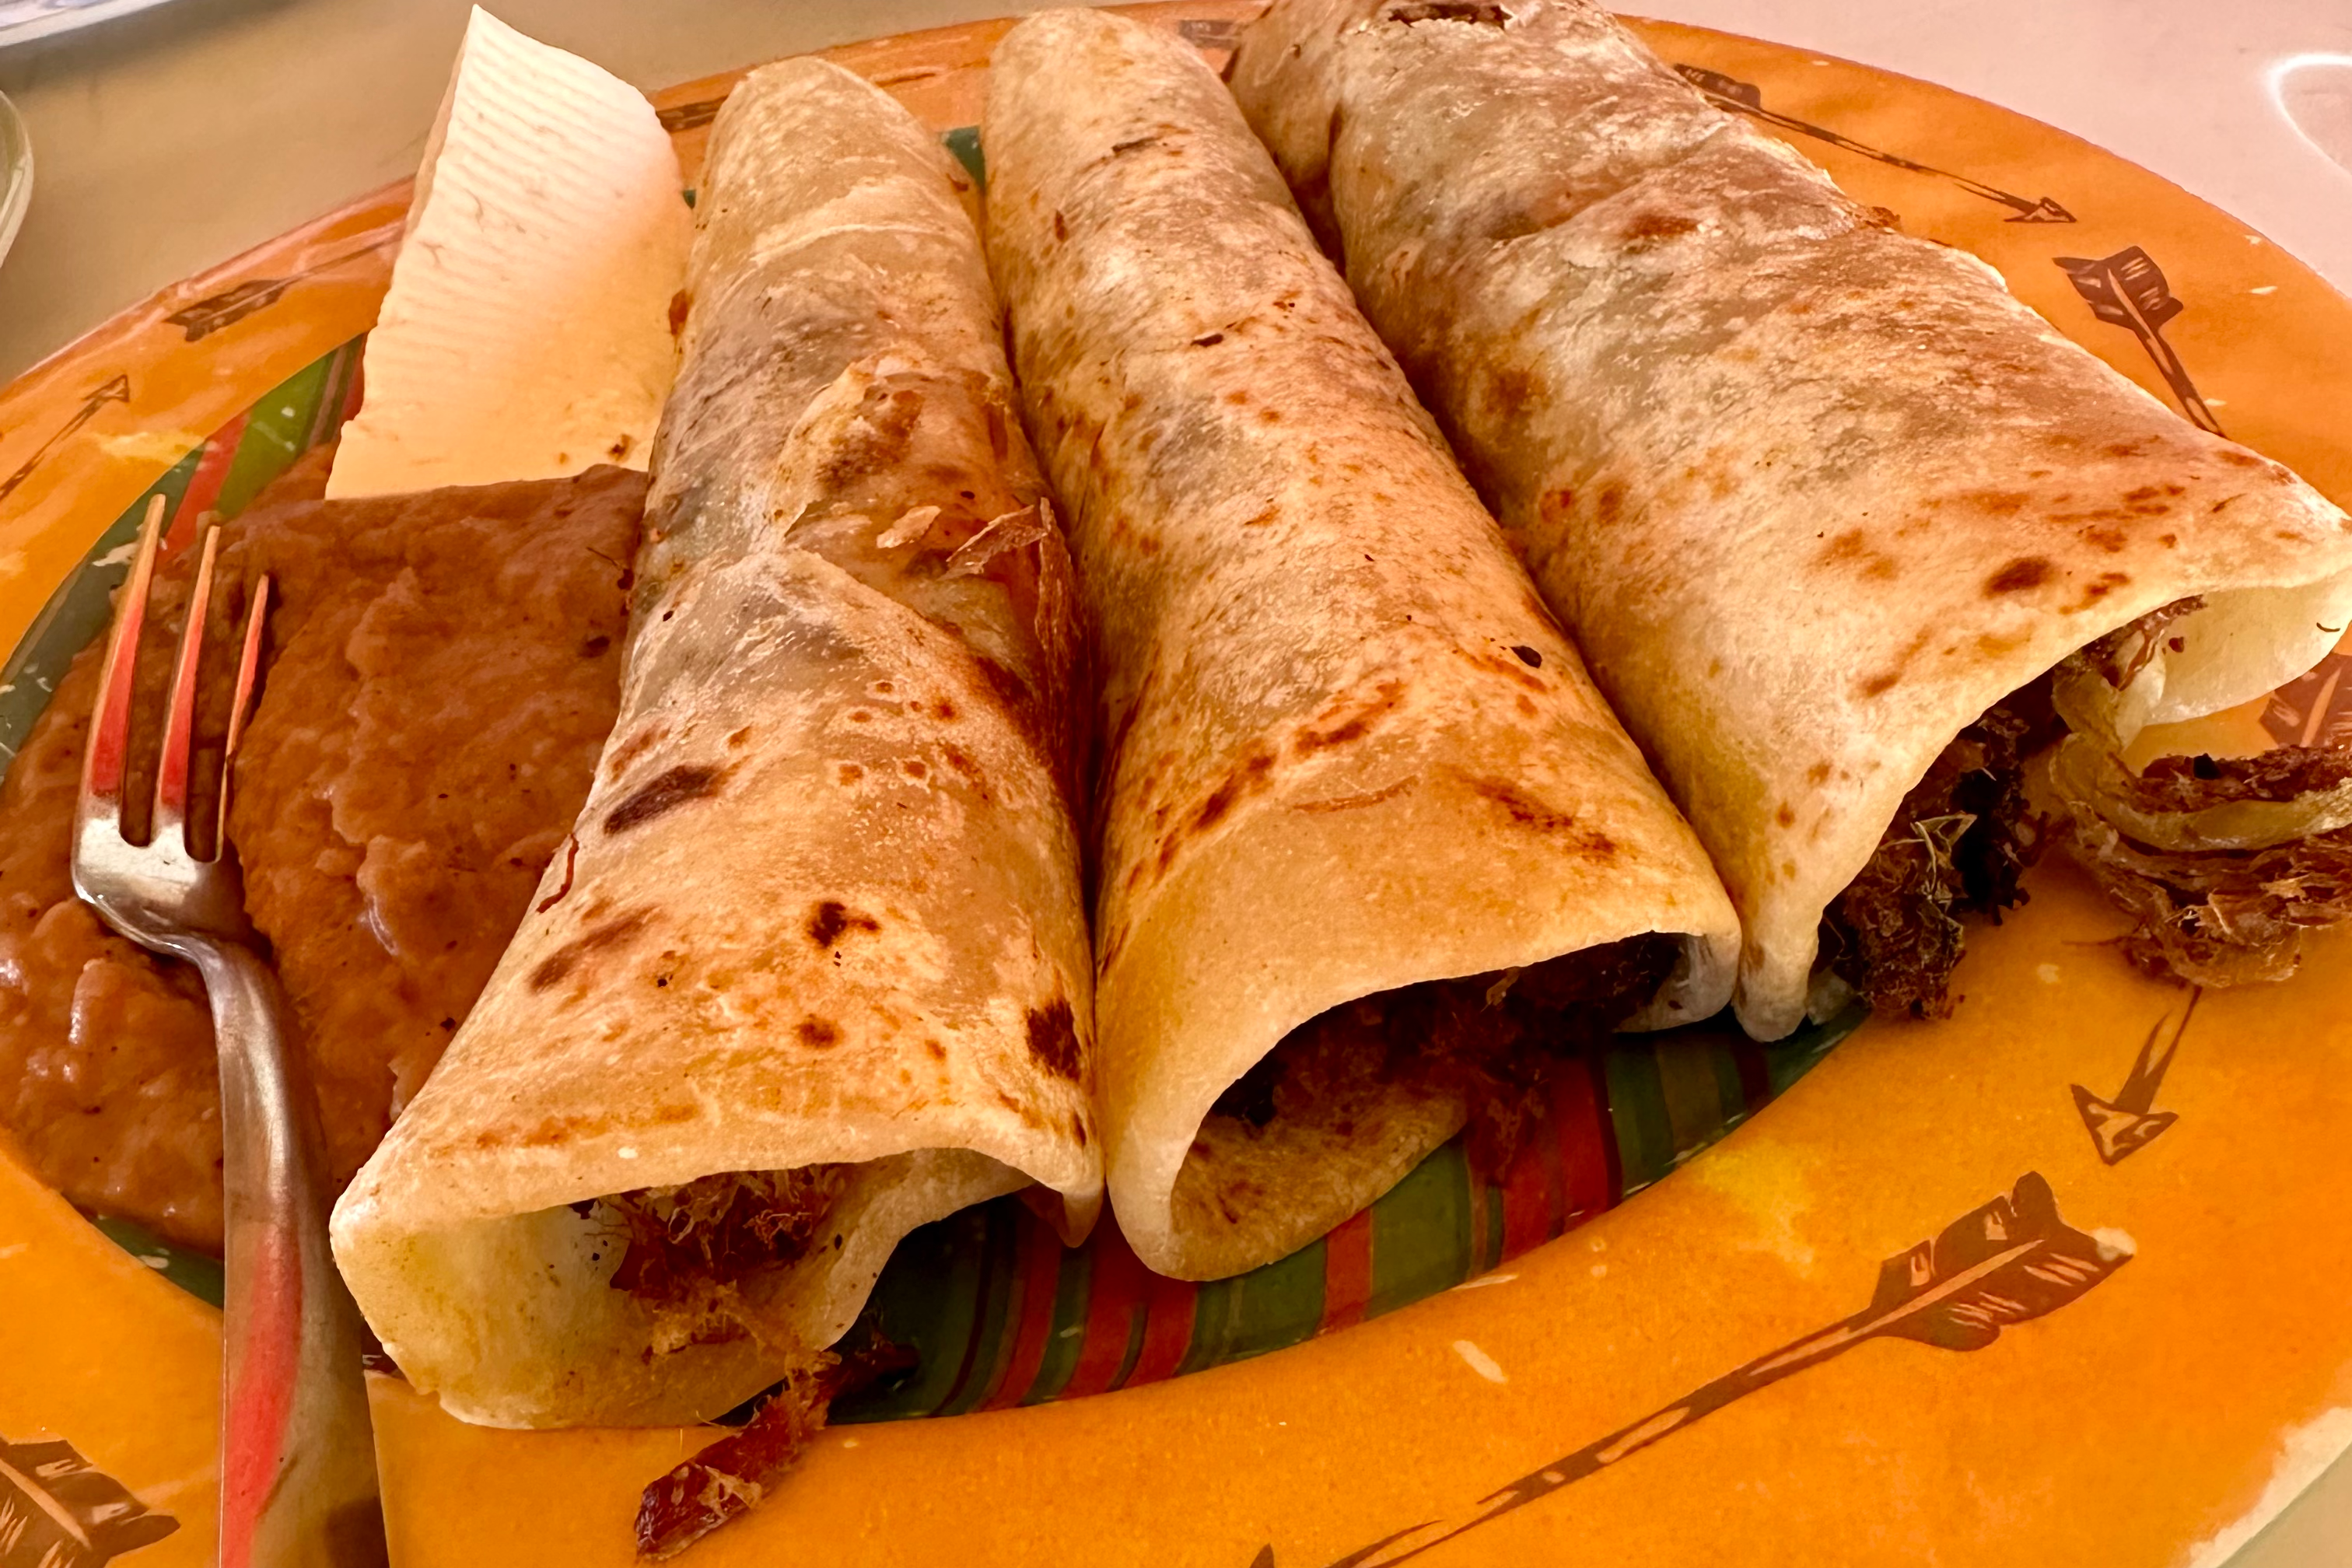 Shredded beef burritos rounded out the meal